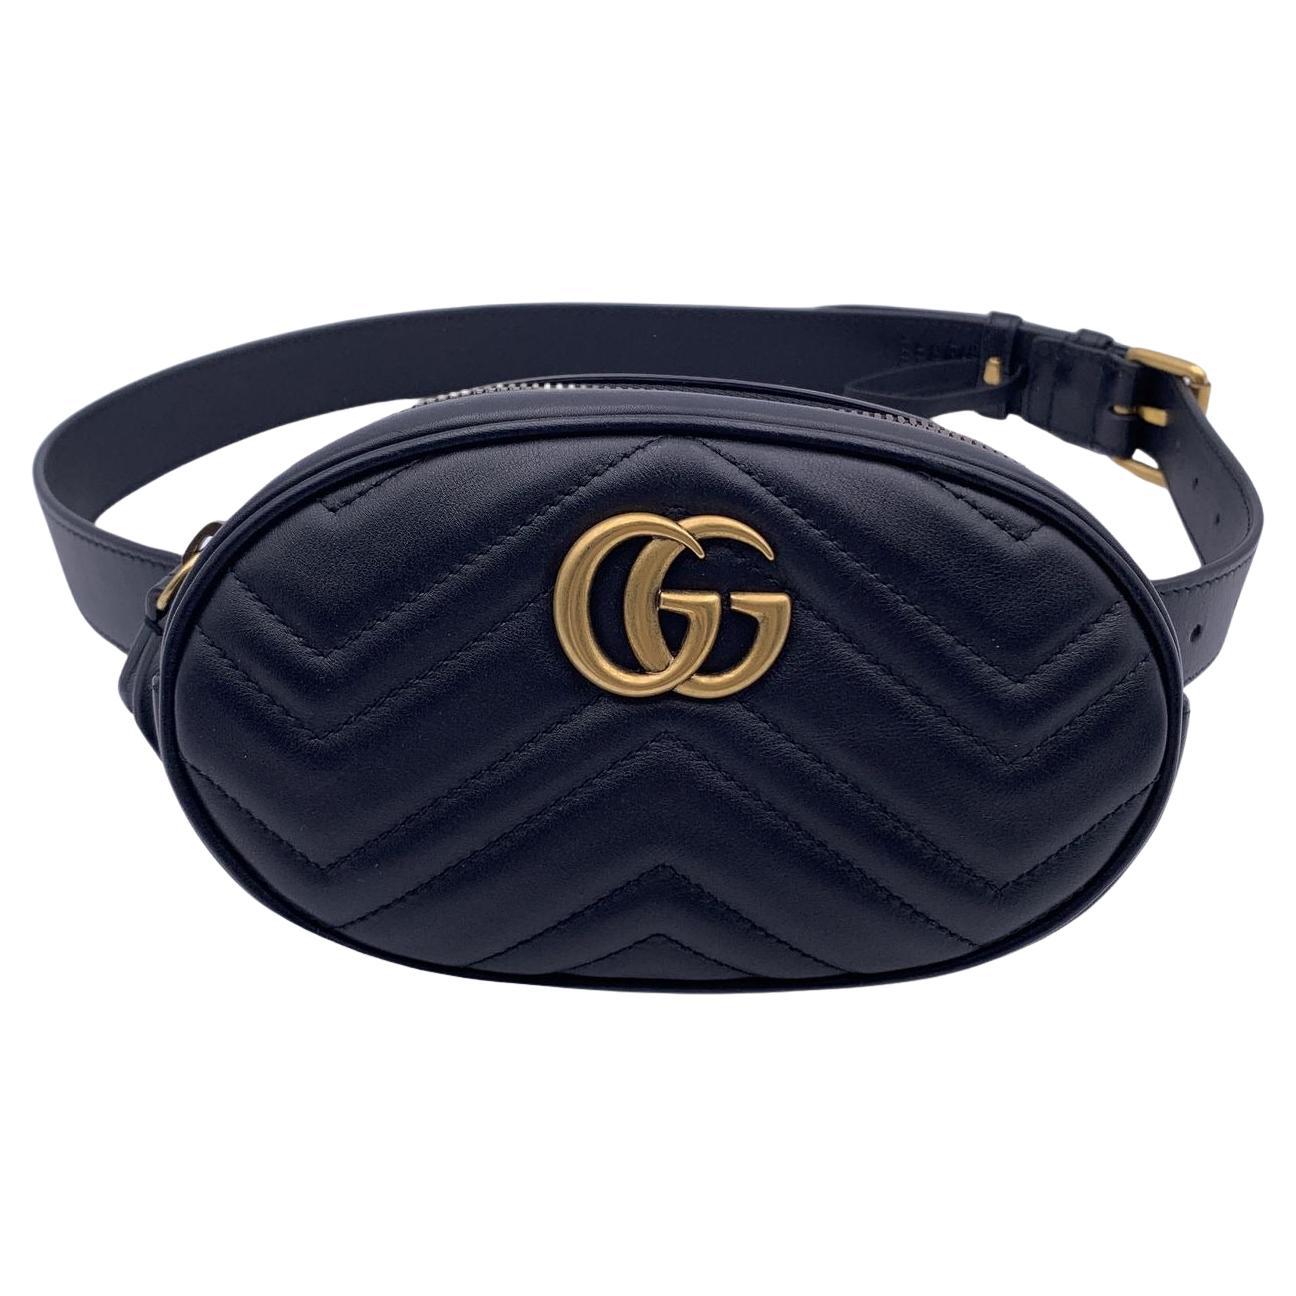 Gucci Black Quilted Leather Marmont GG Belt Waist Bag Size 85/34